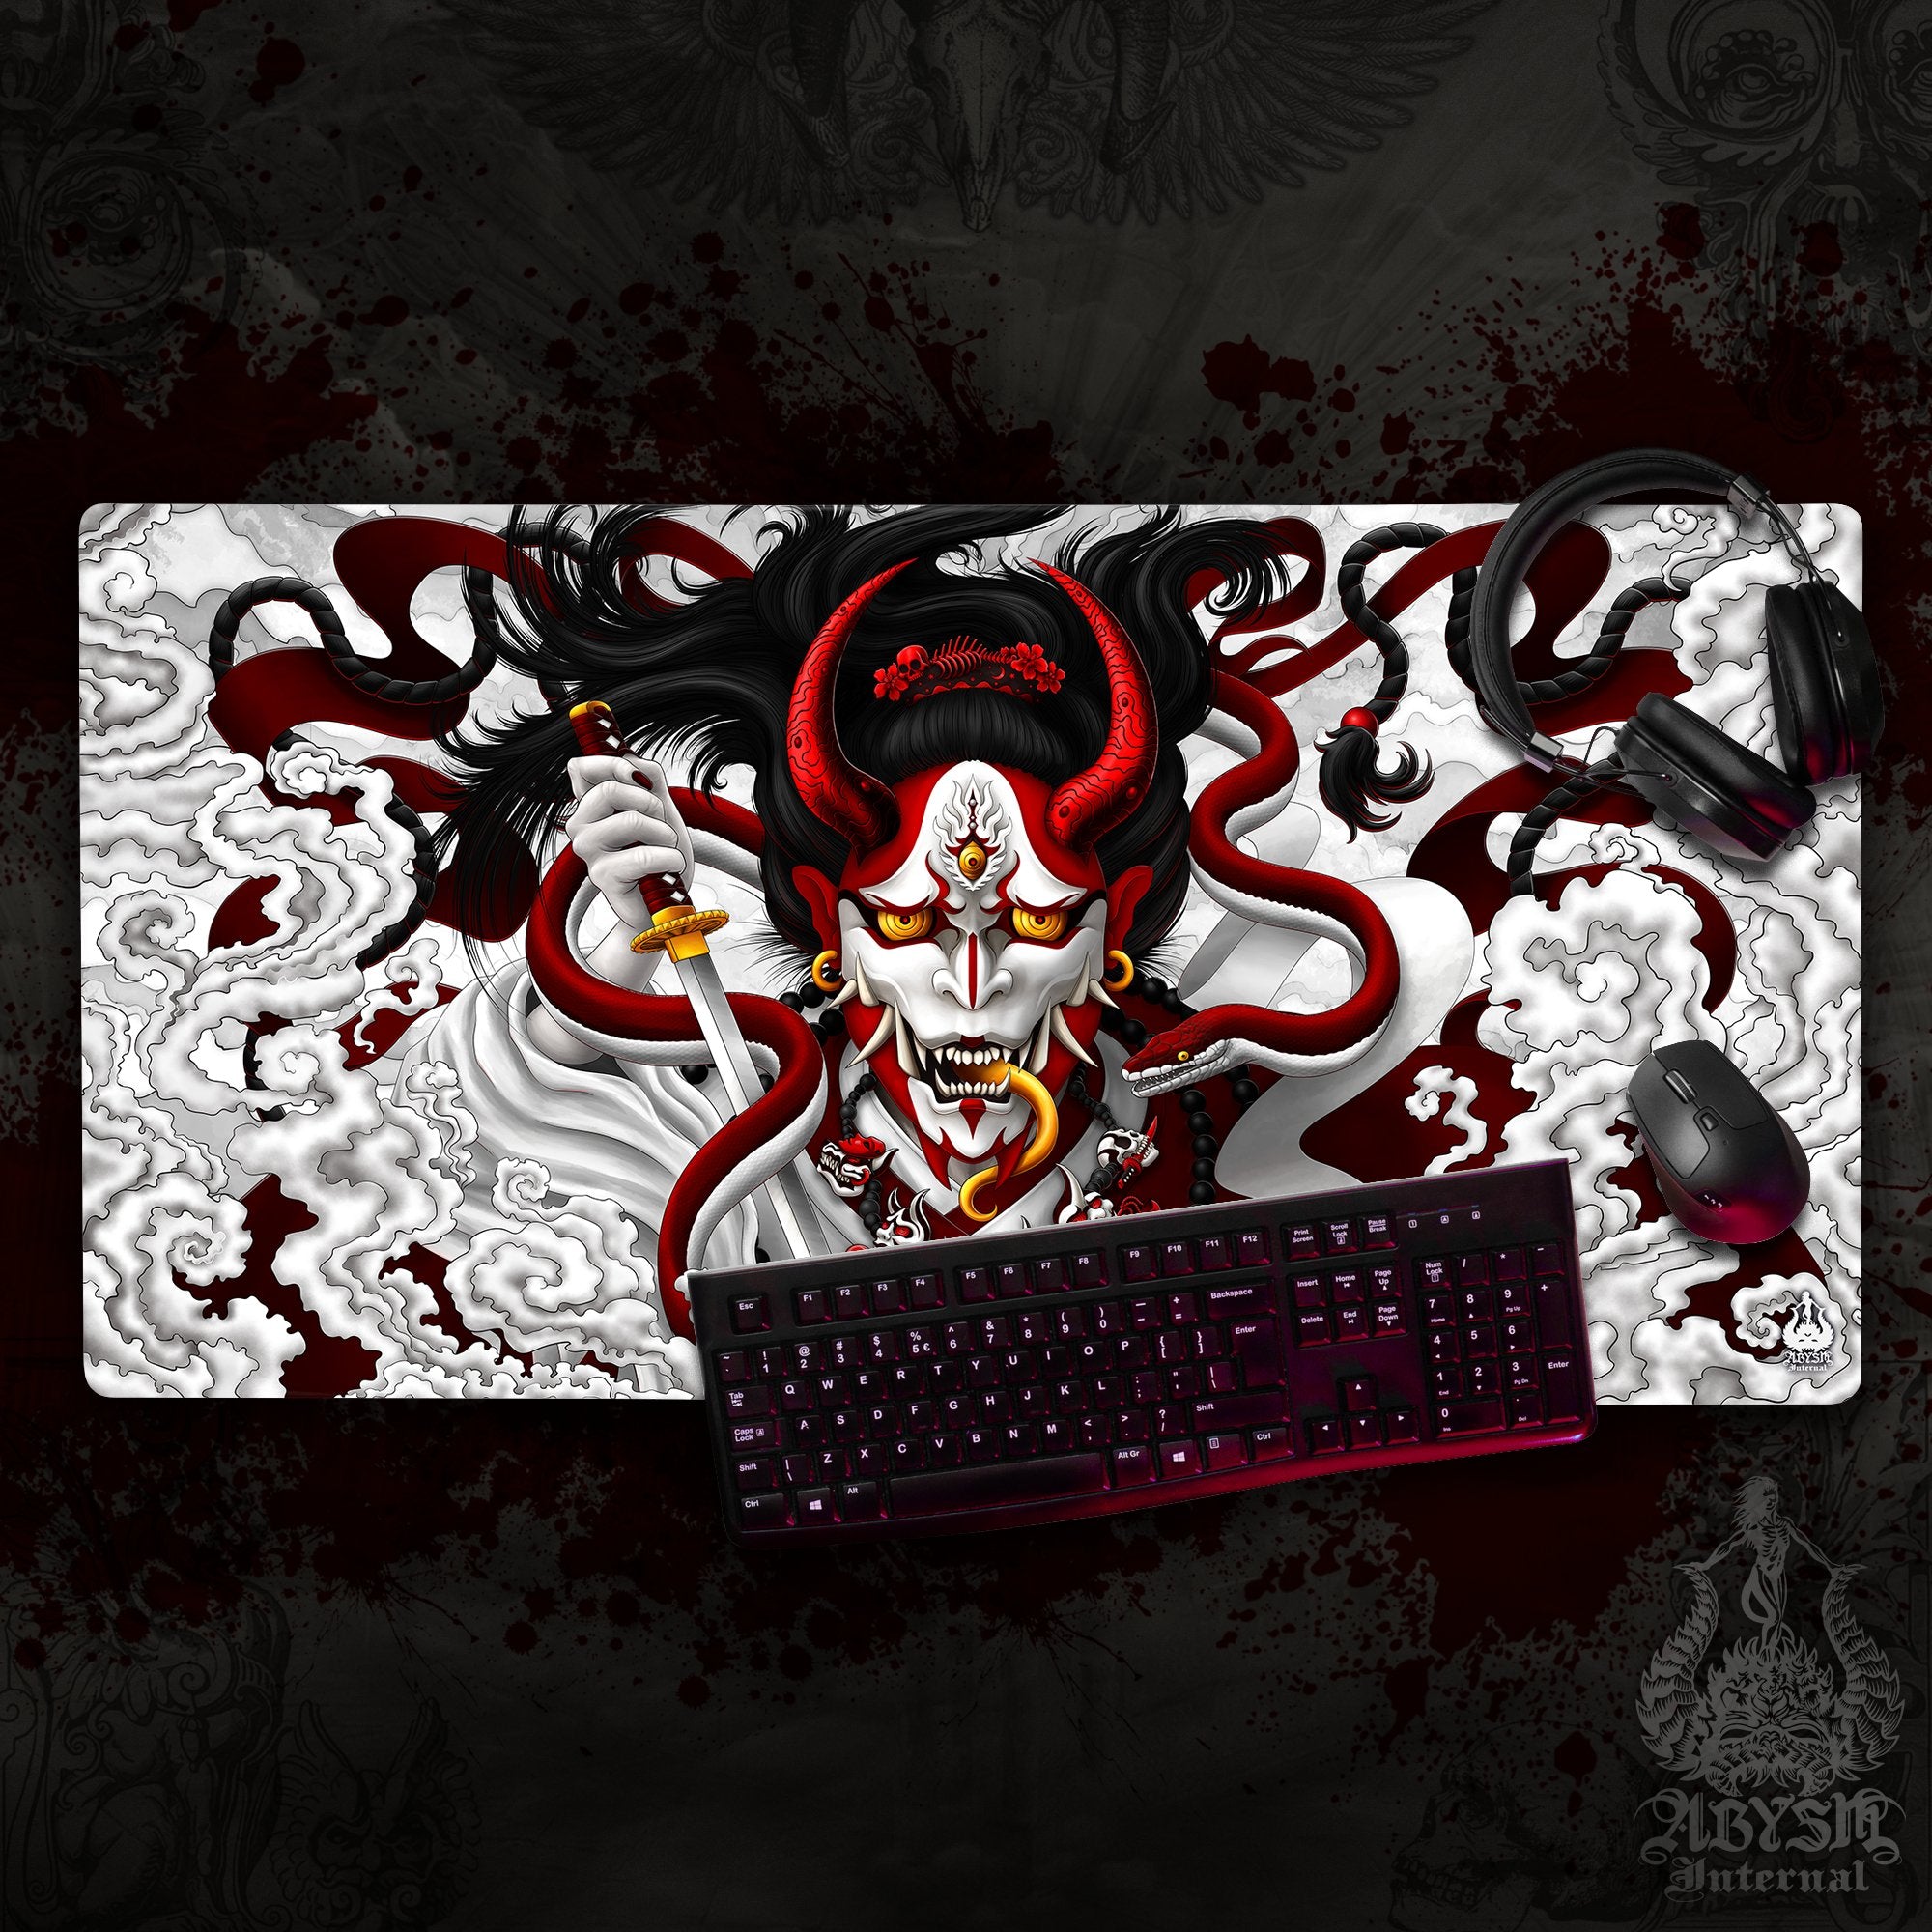 Youkai Mouse Pad, Japanese Demon Gaming Desk Mat, Hannya Workpad, White Goth Red Table Protector Cover, Fantasy Anime and Manga Art Print - Snake - Abysm Internal